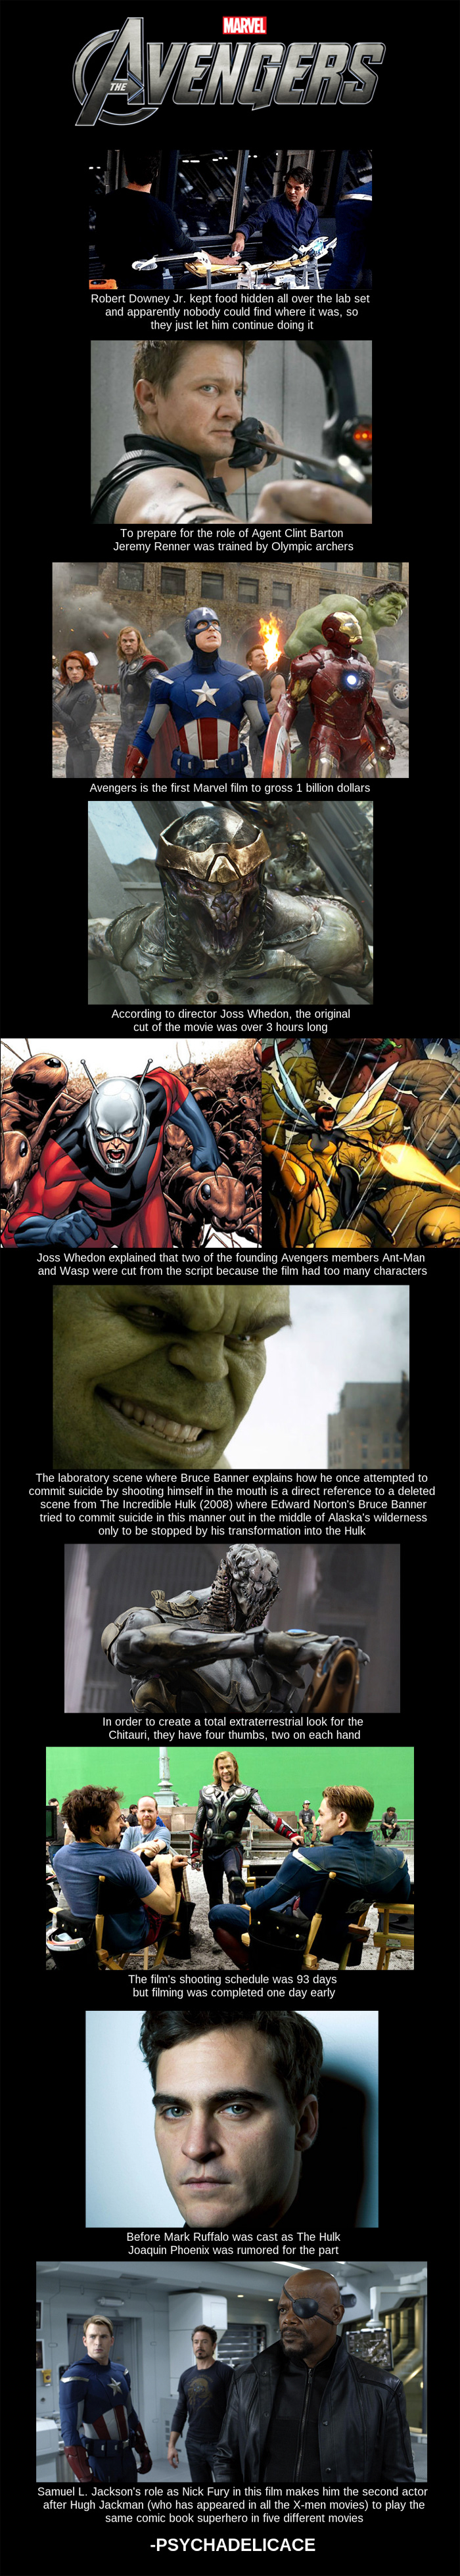 Avengers Movie Facts